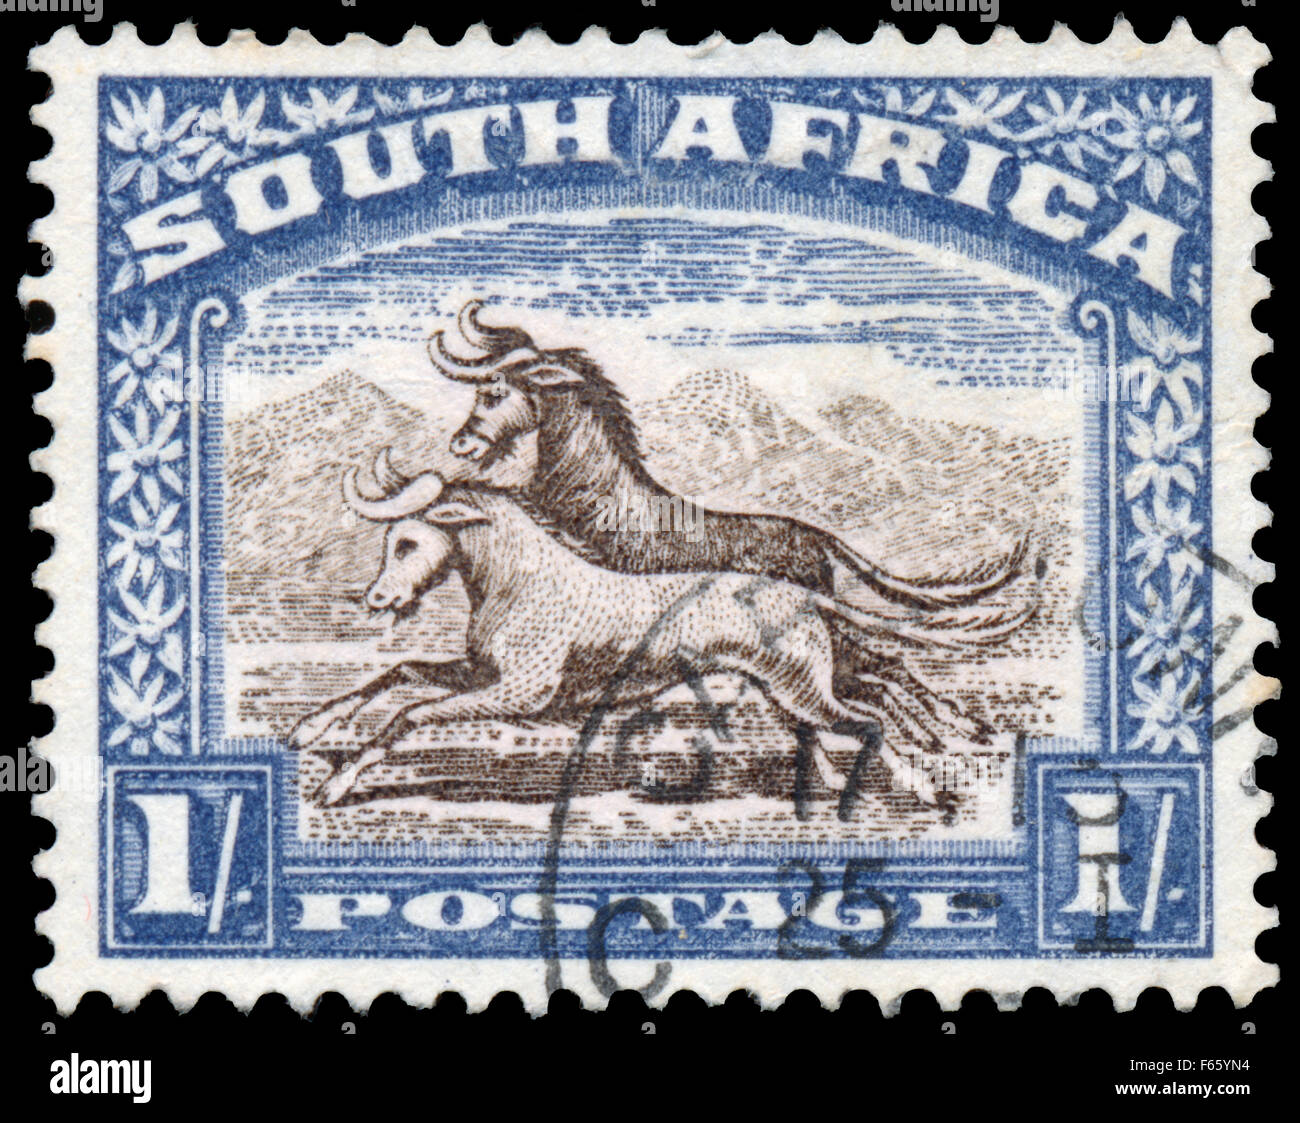 SOUTH AFRICA - CIRCA 1933: Stamp printed in South Africa shows image of two goats galloping, circa 1933 Stock Photo